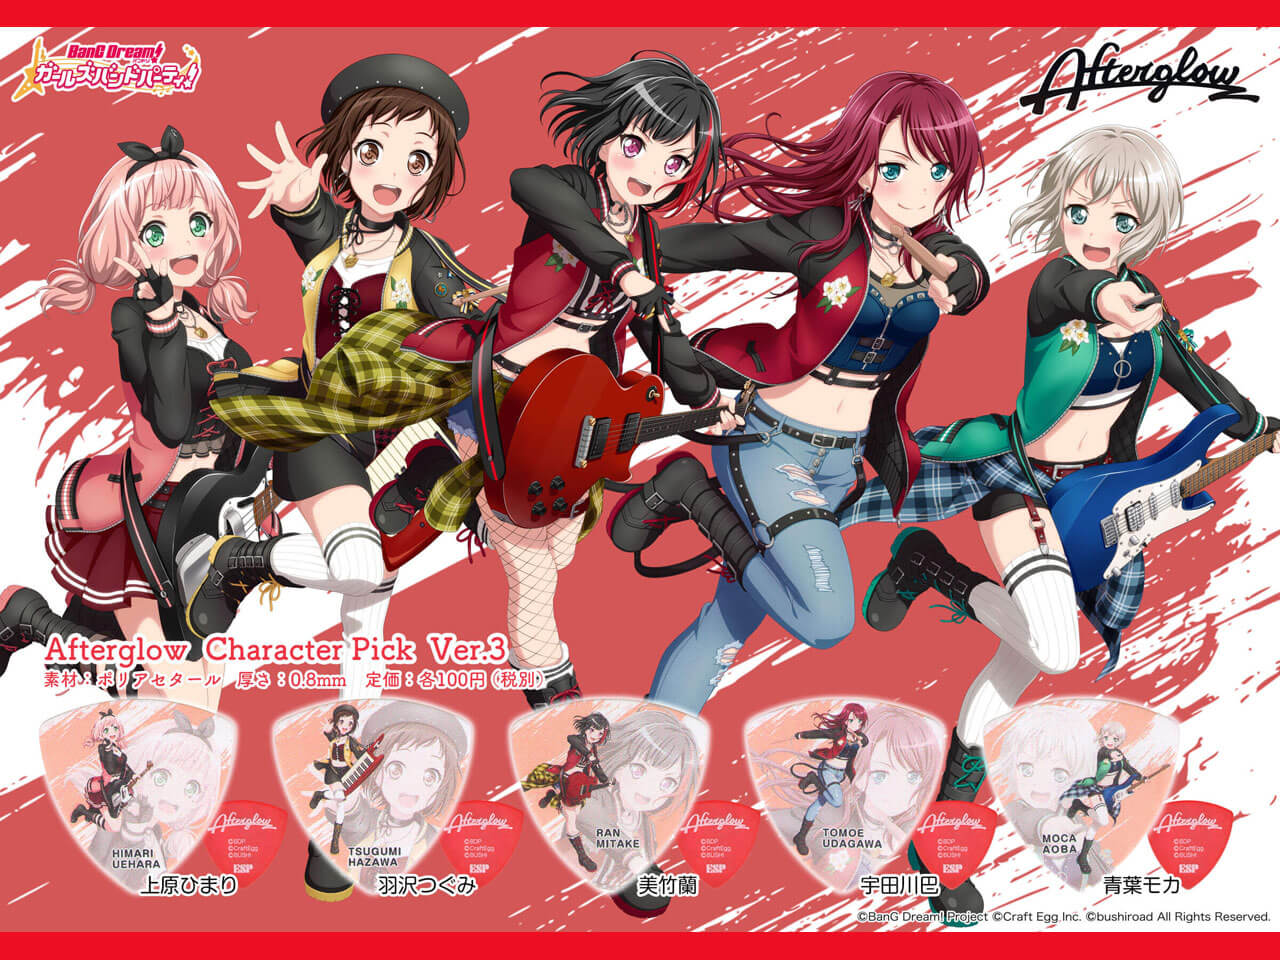 【ESP×BanG Dream!コラボピック】Afterglow Character Pick Ver.3 "羽沢つぐみ"（GBP TSUGUMI AFTERGLOW 3）＆”ハメパチ” セット